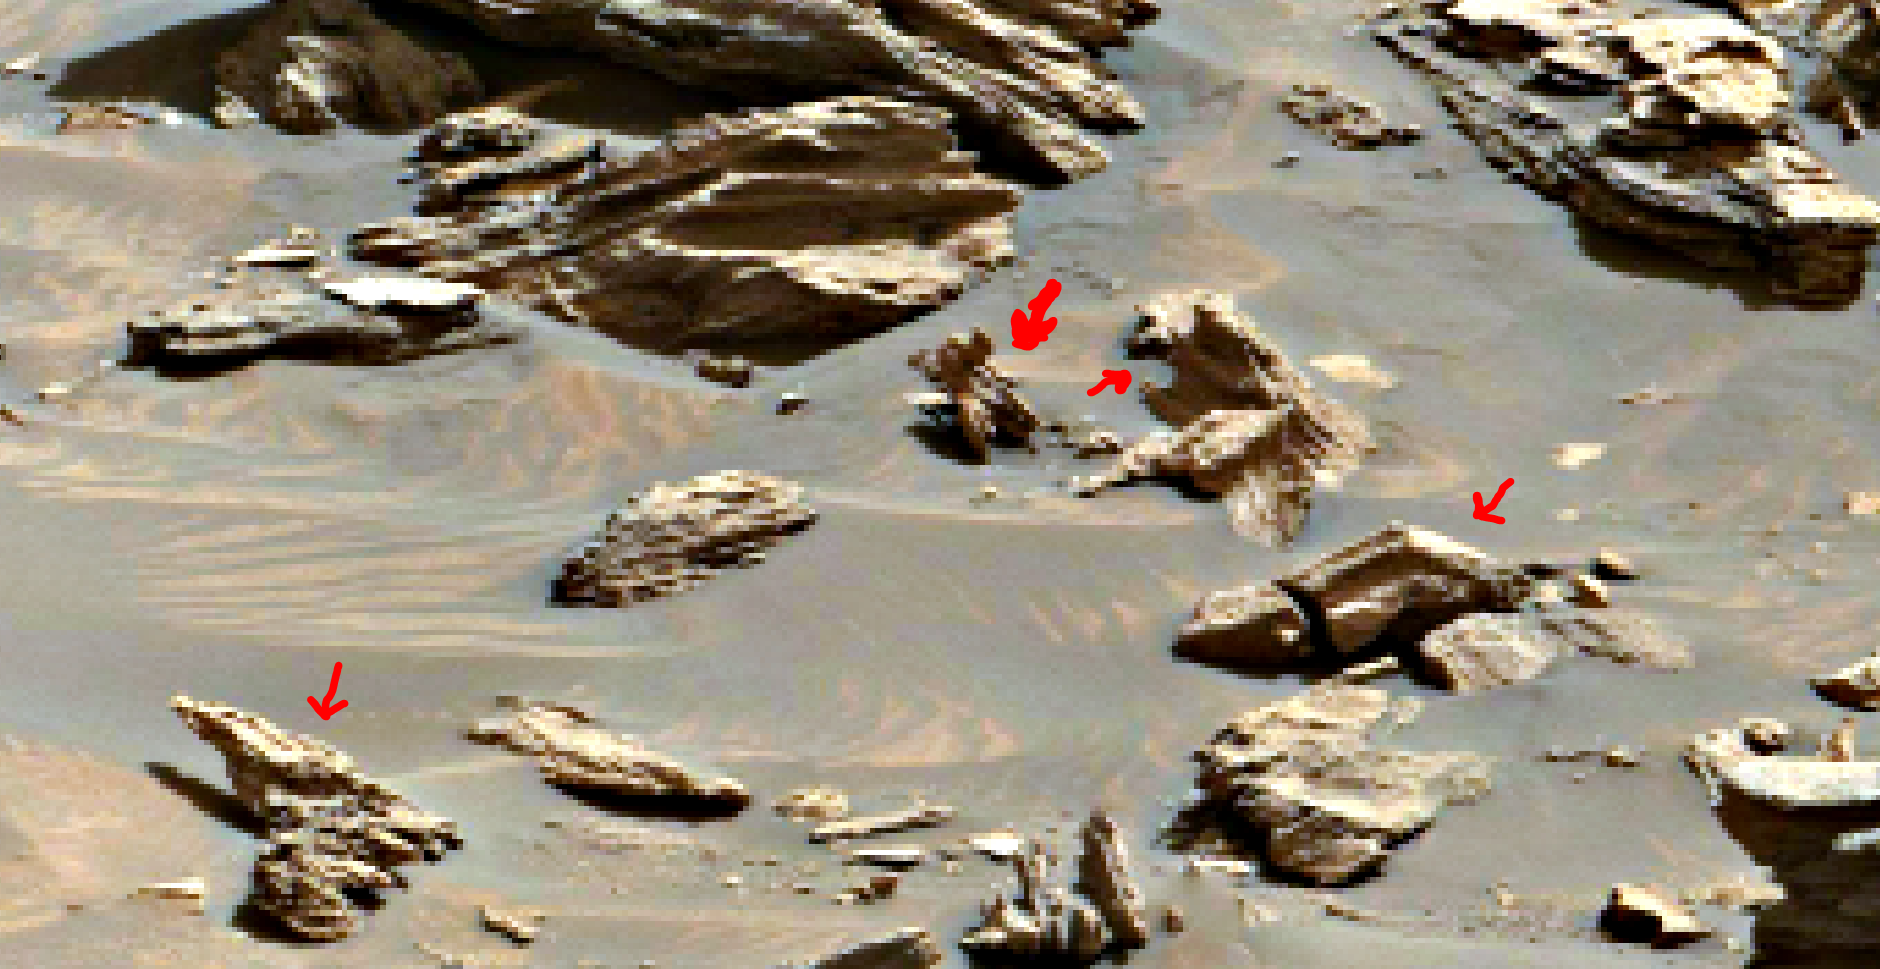 mars-sol-1448-anomaly-artifacts-14-was-life-on-mars